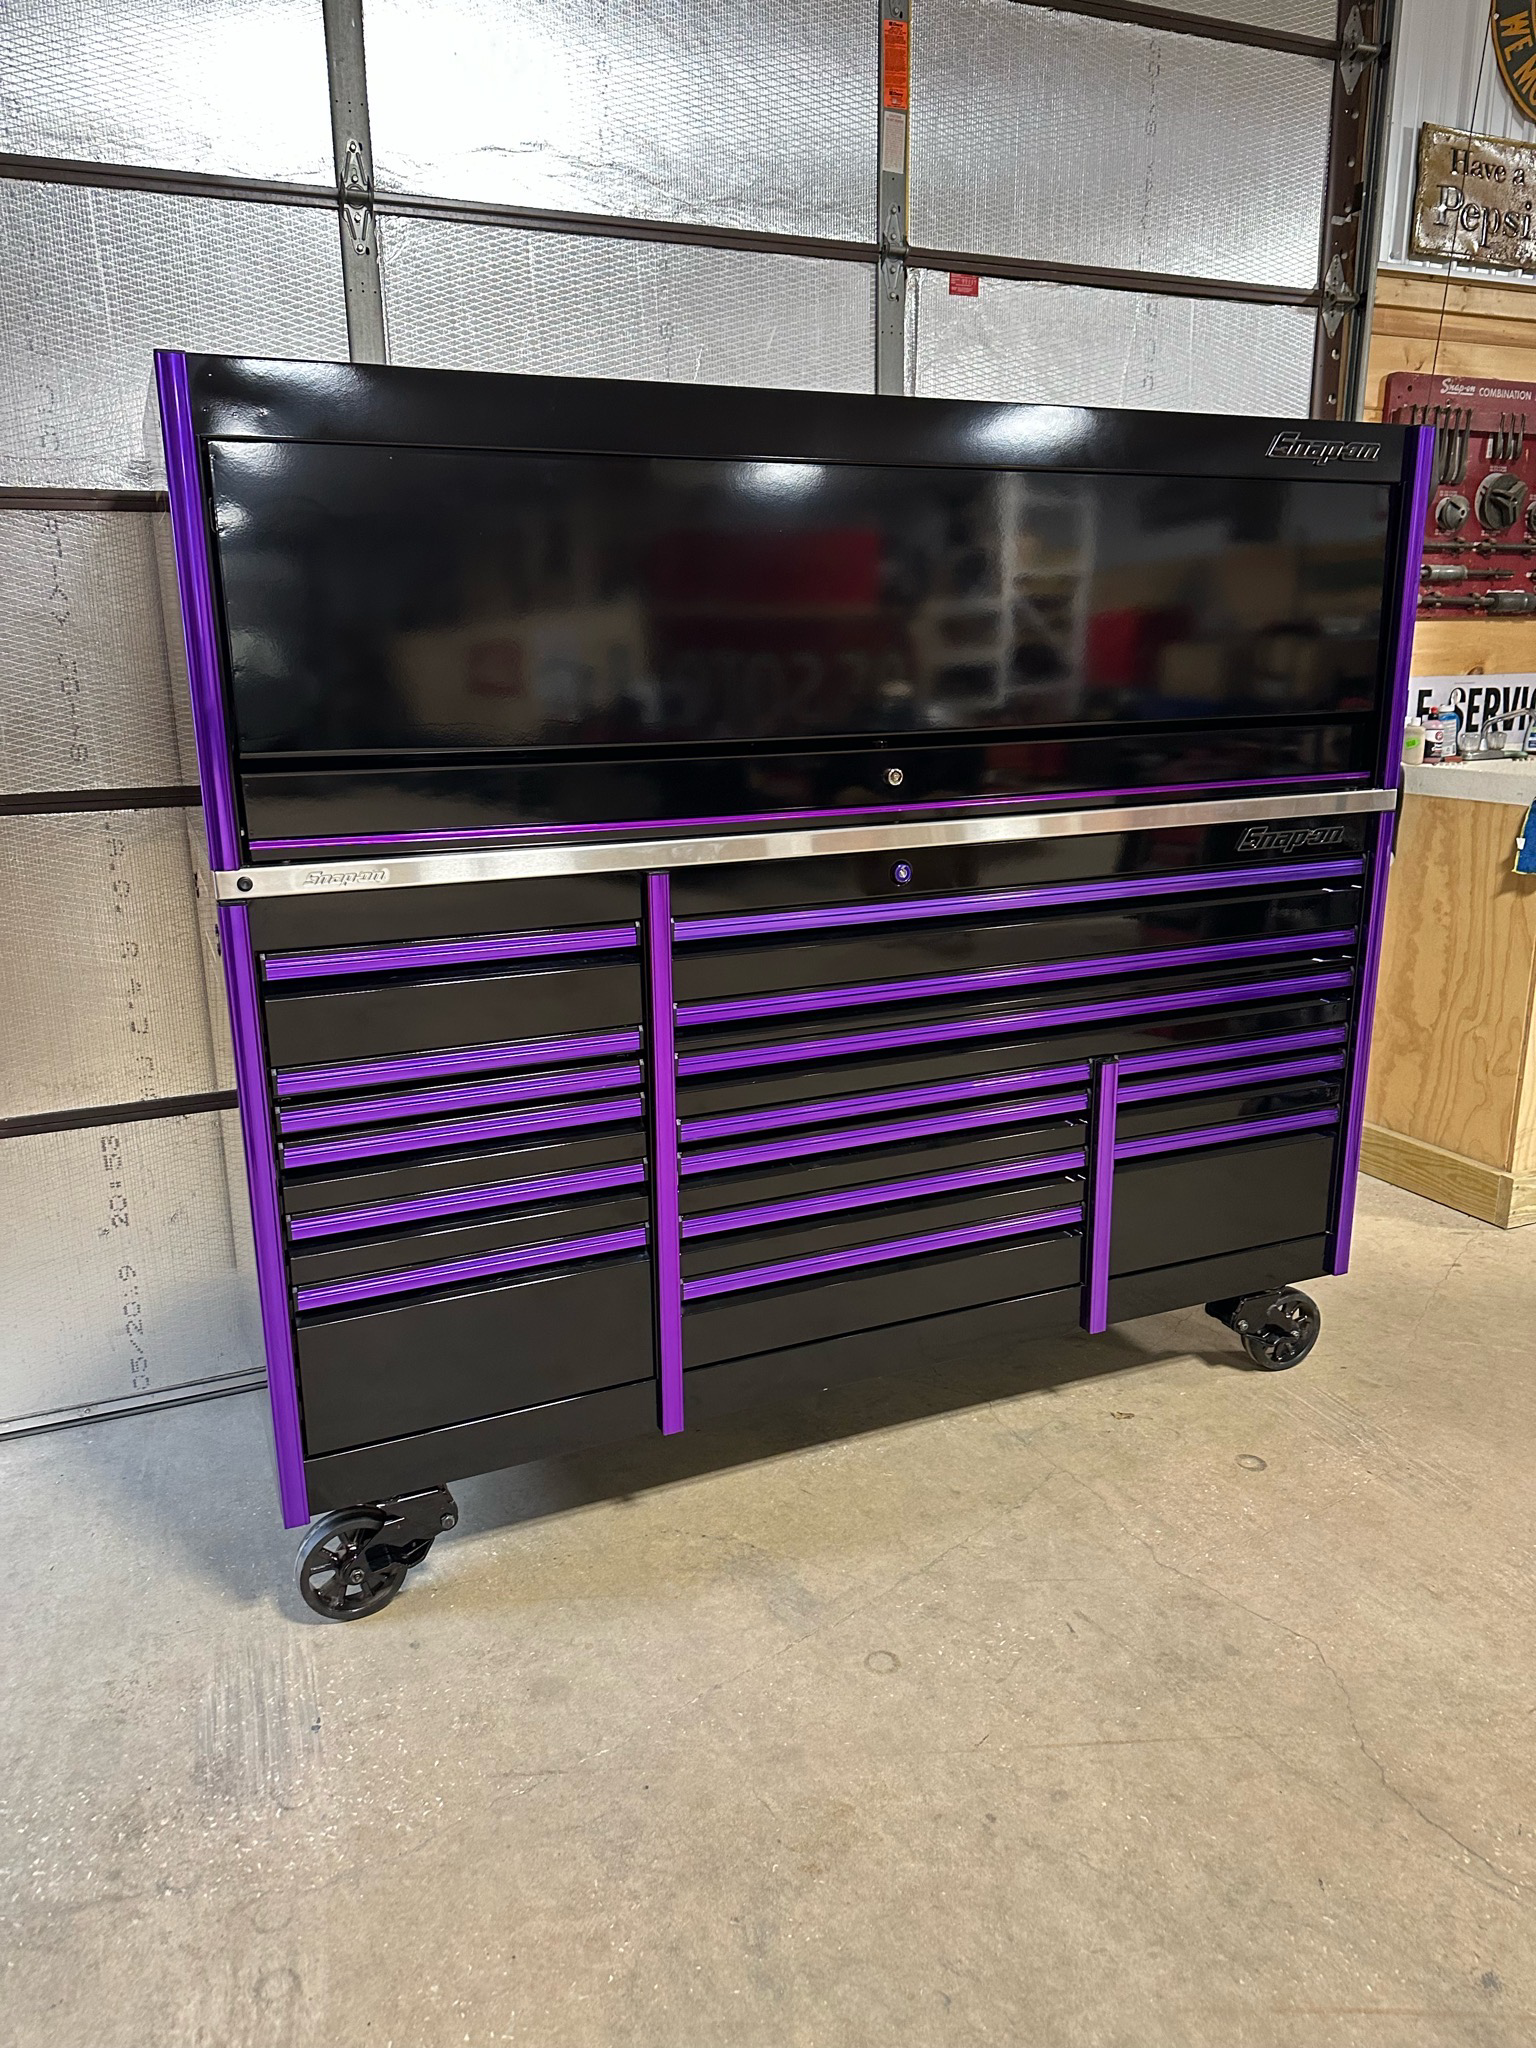 Snap On Tool Box 68” Artic Silver With Purple Trim for Sale in